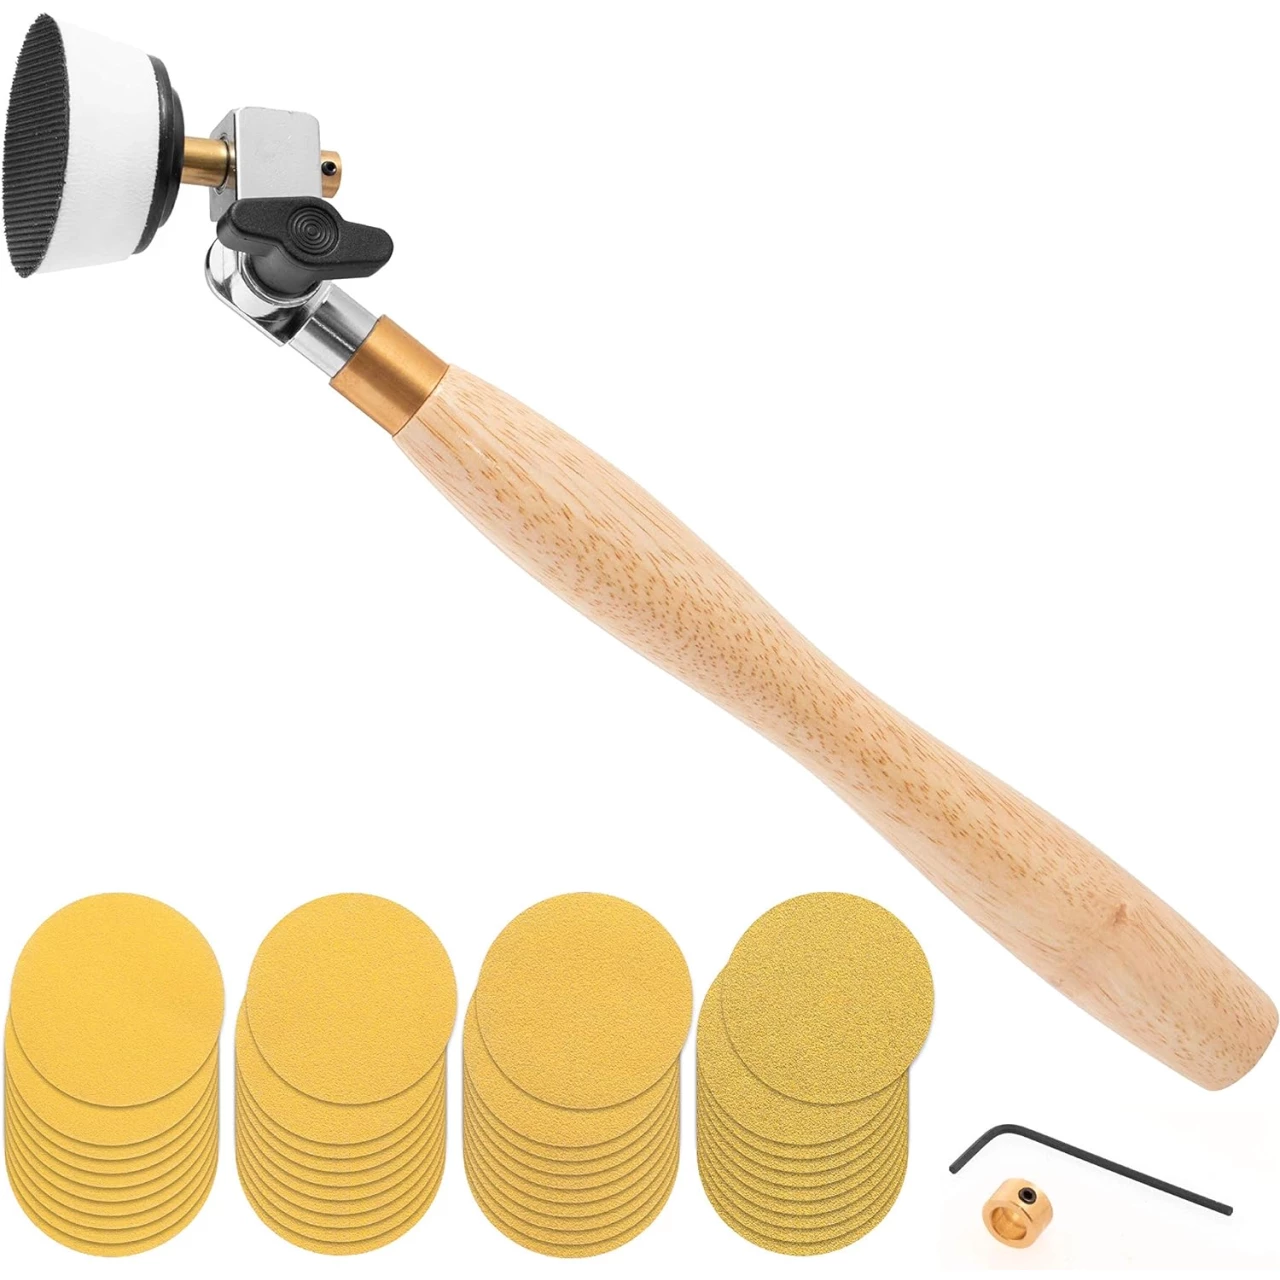 2 inch Diameter Bowl Sander with Dual Bearing Head and 2 inch Foam Hook and Loop Sander with 1/4 inch Mandrel and 9 inch Long Hardwood Handle